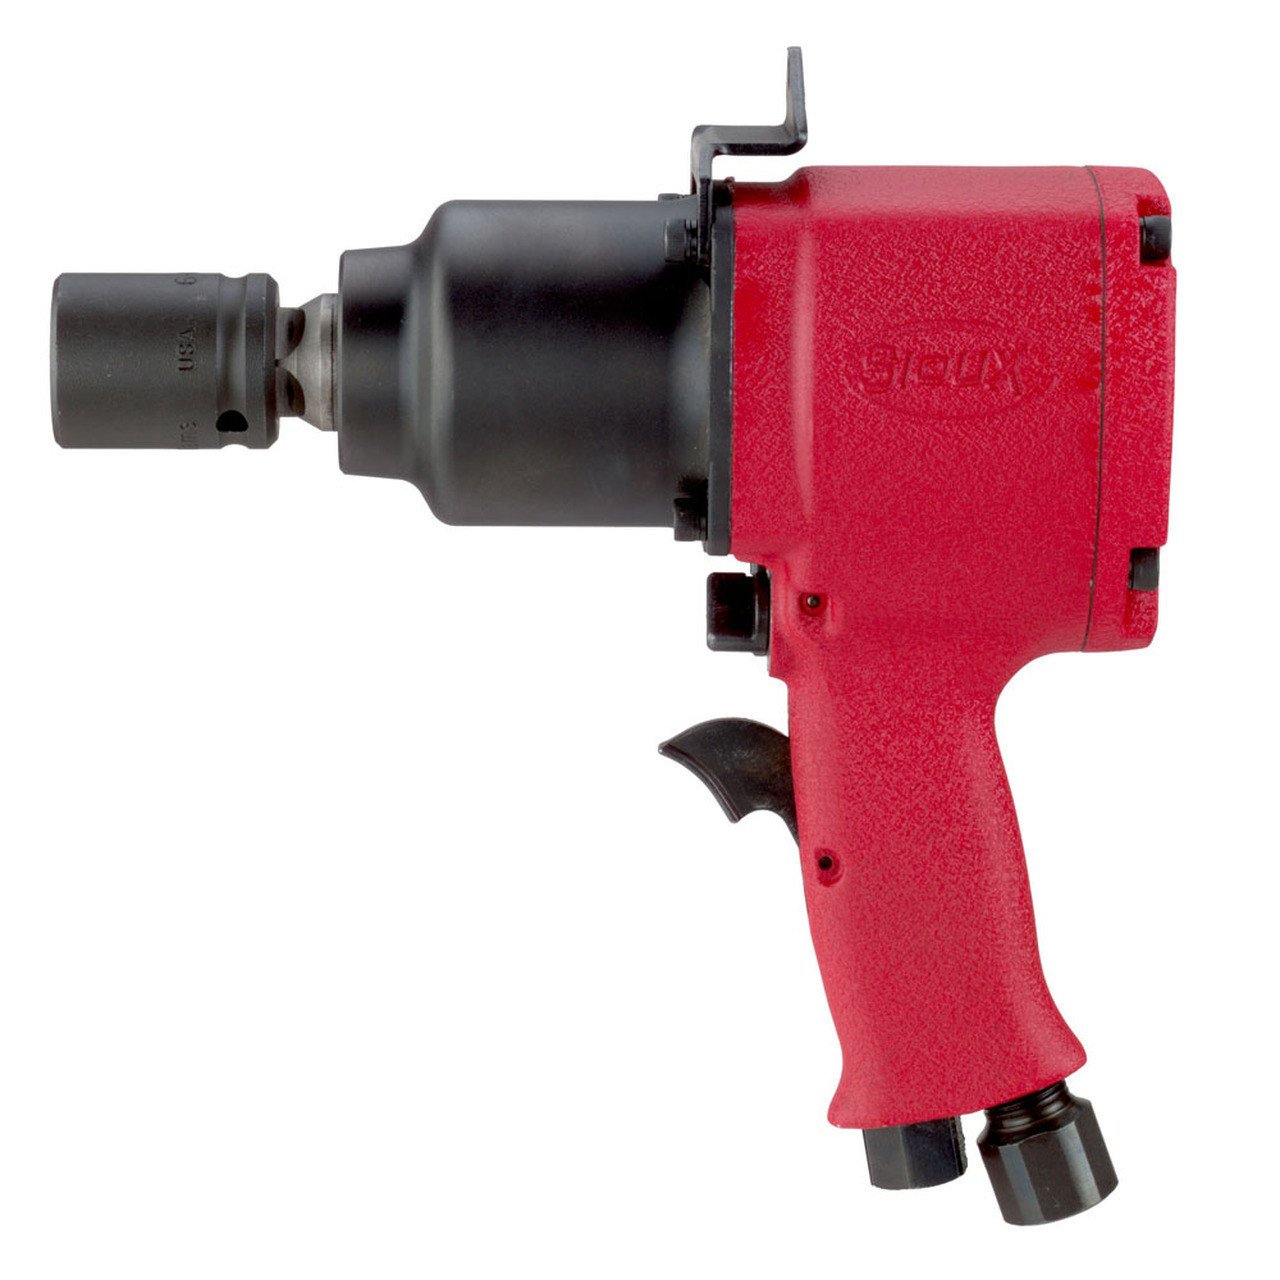 Sioux Tools IW75BP-6H Impact Wrench | 3/4" Drive | 5700 RPM | 1000 ft. lbs. Max Torque